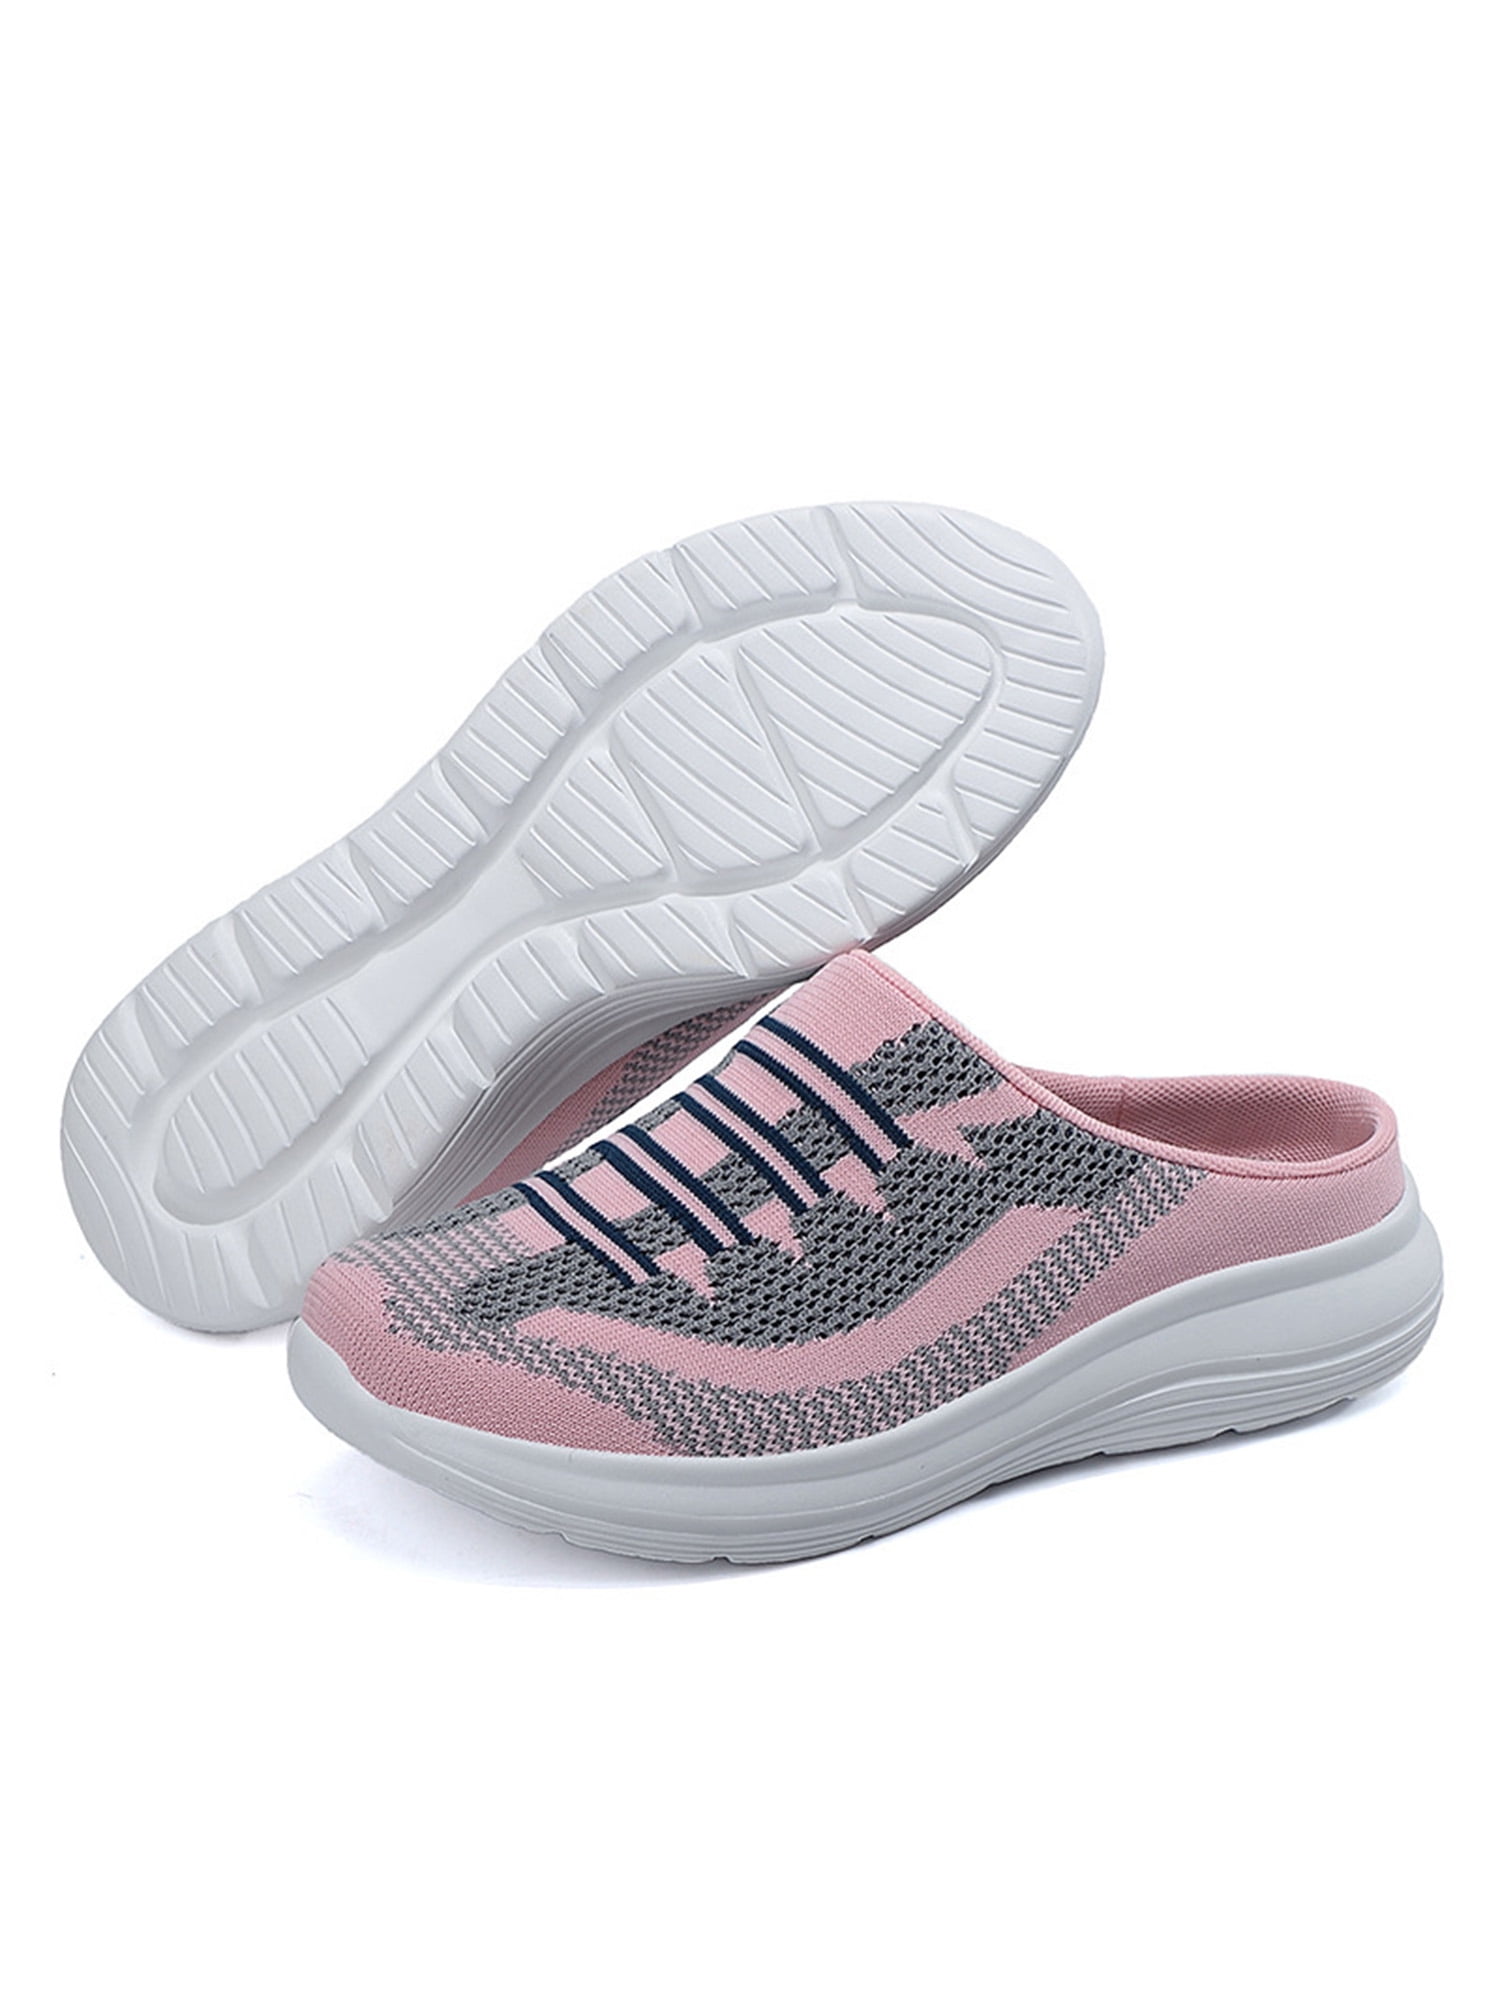 Women's Slip-on Mules Sneakers Walking Shoes with Arch Support Orthopedic Slip On Clog for Ladies Comfortable Breathable House Slippers Garden Shoes 